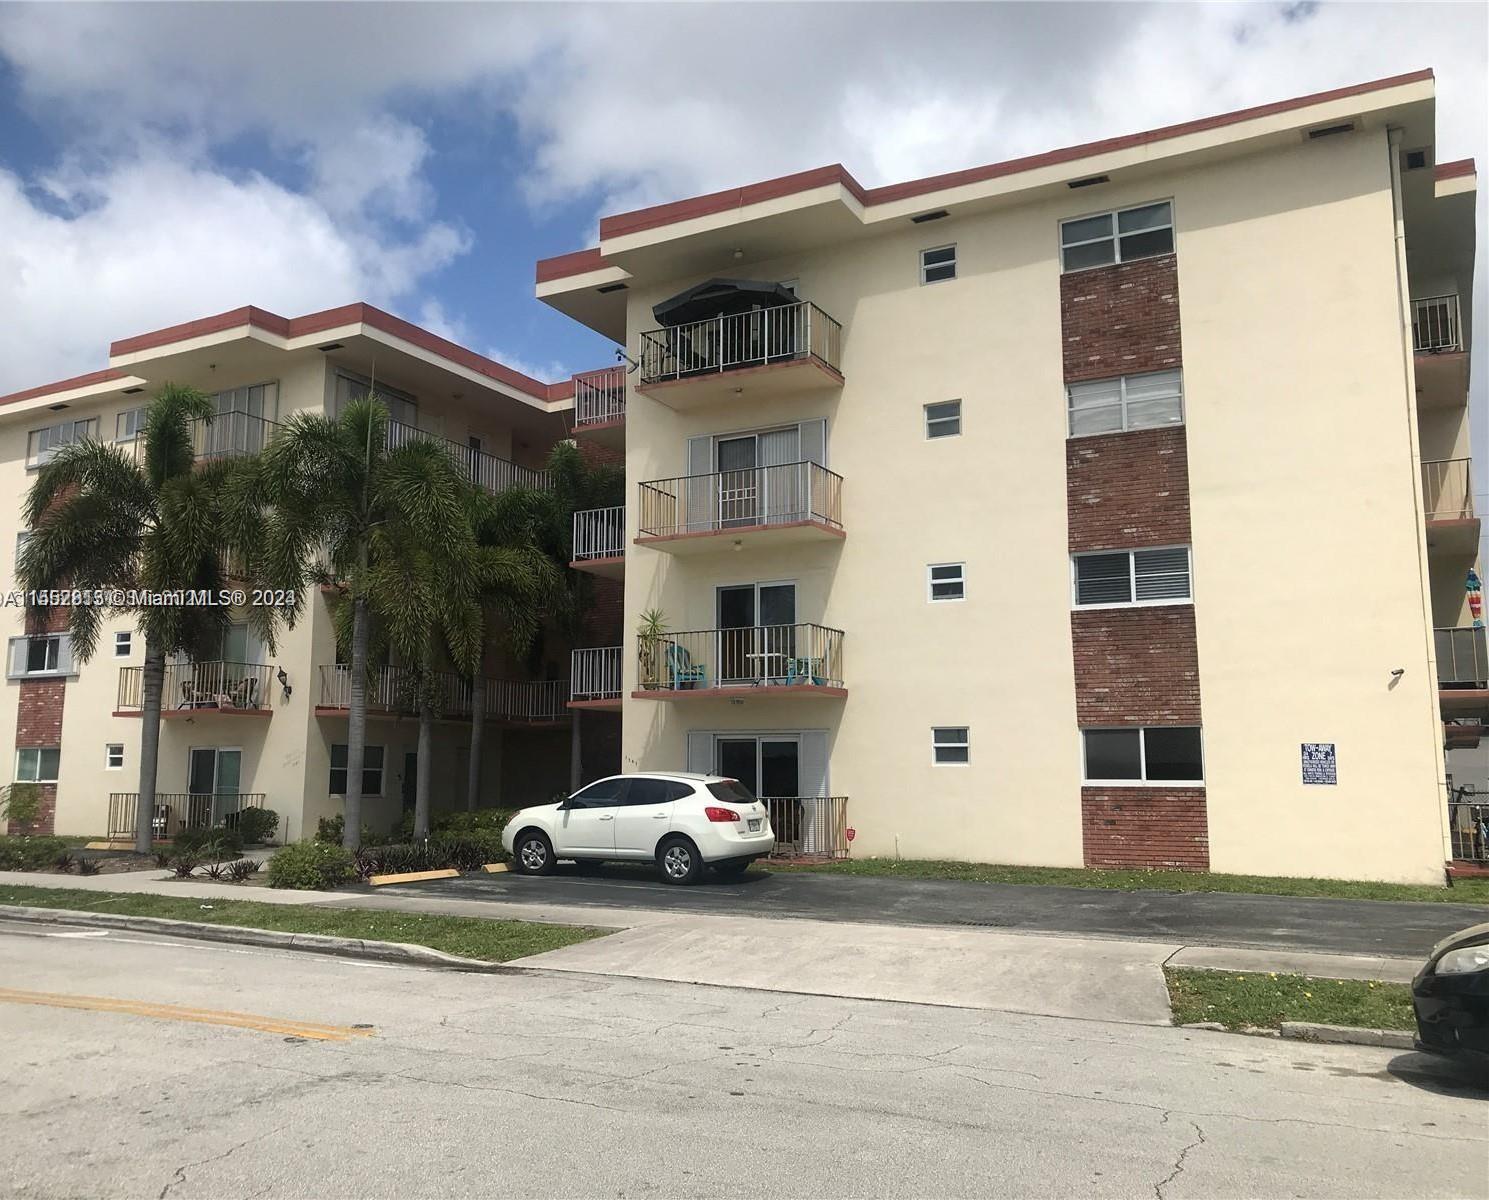 Photo of 1747 Rodman St #308 in Hollywood, FL